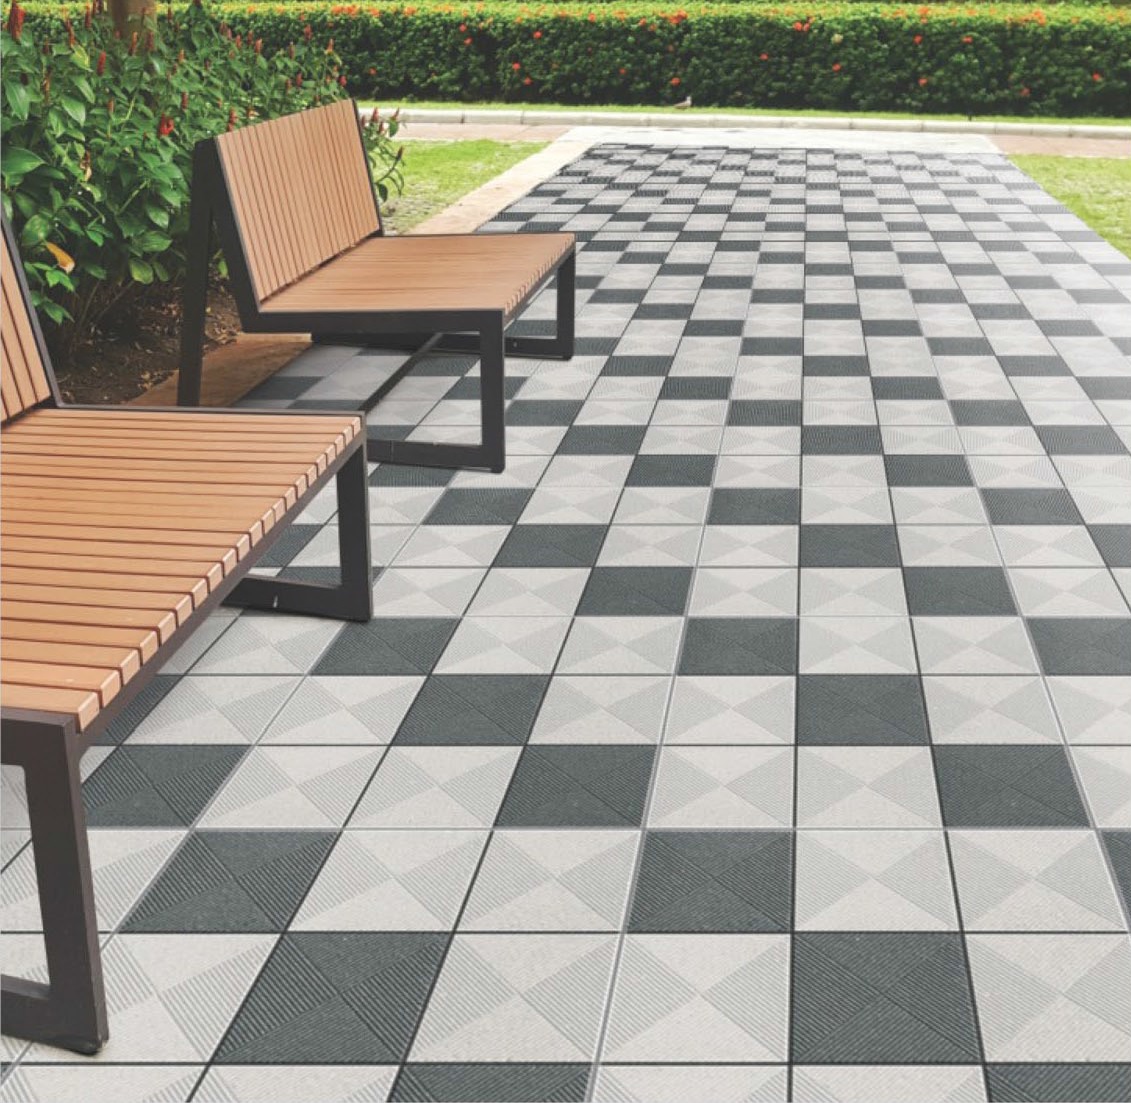 2x2 parking tiles manufacturer in india